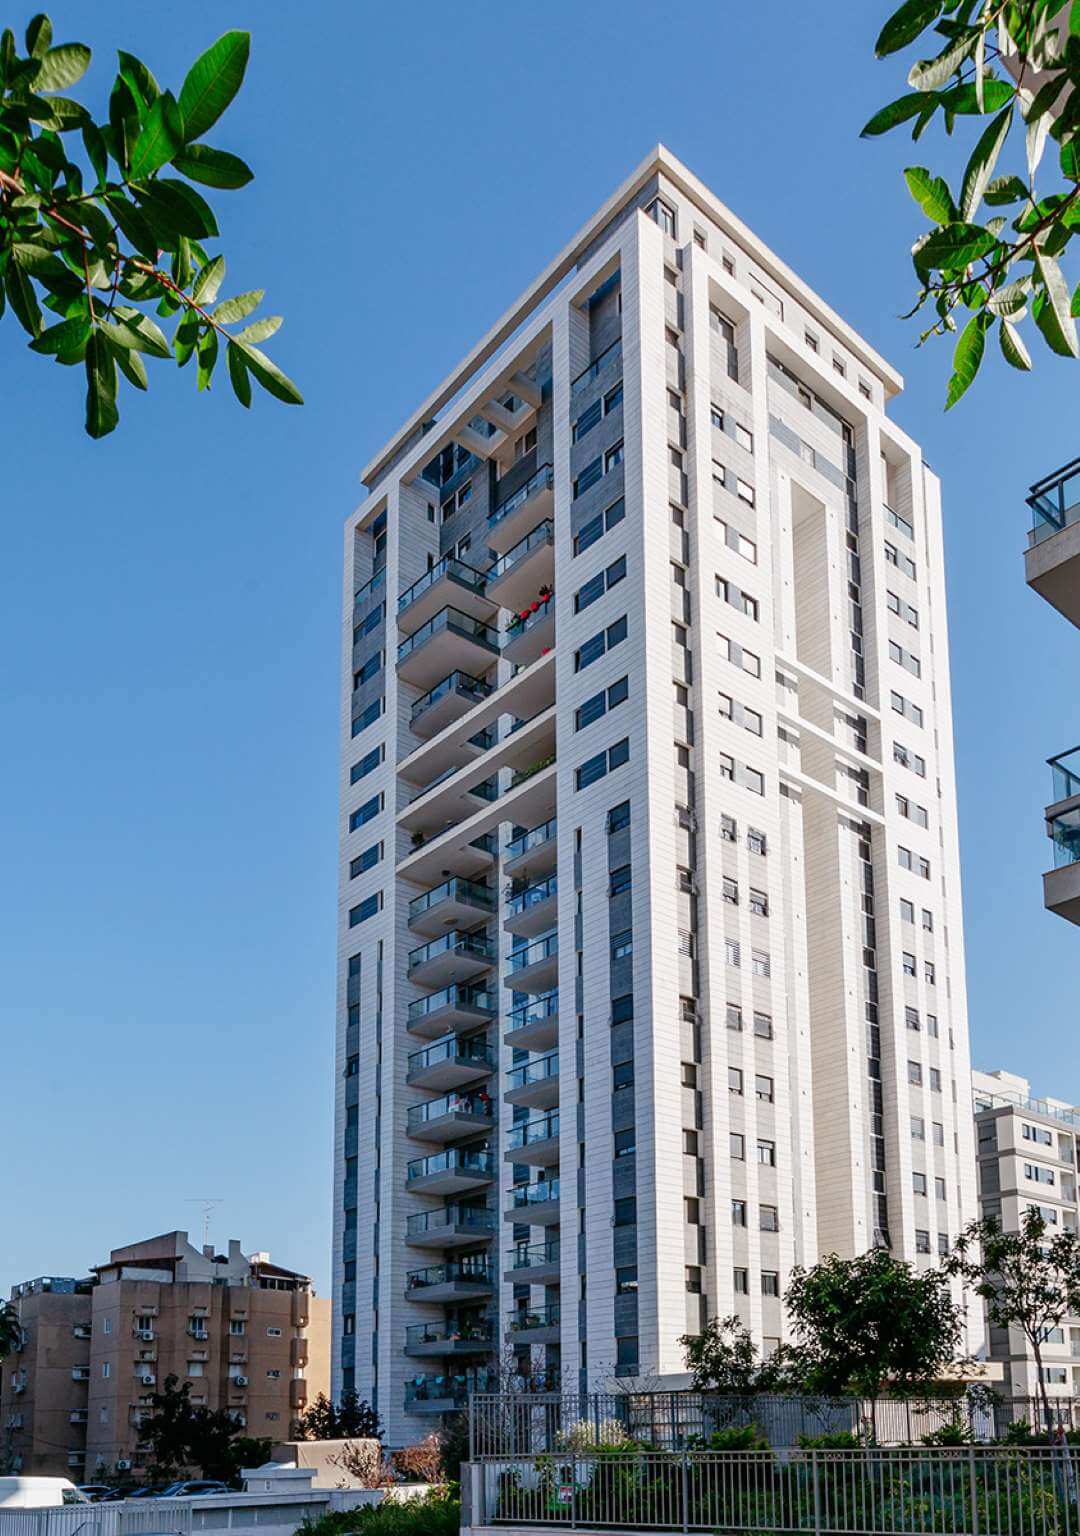 Photograph of a residential building from the UNIK ALPHA project in Ramat Gan